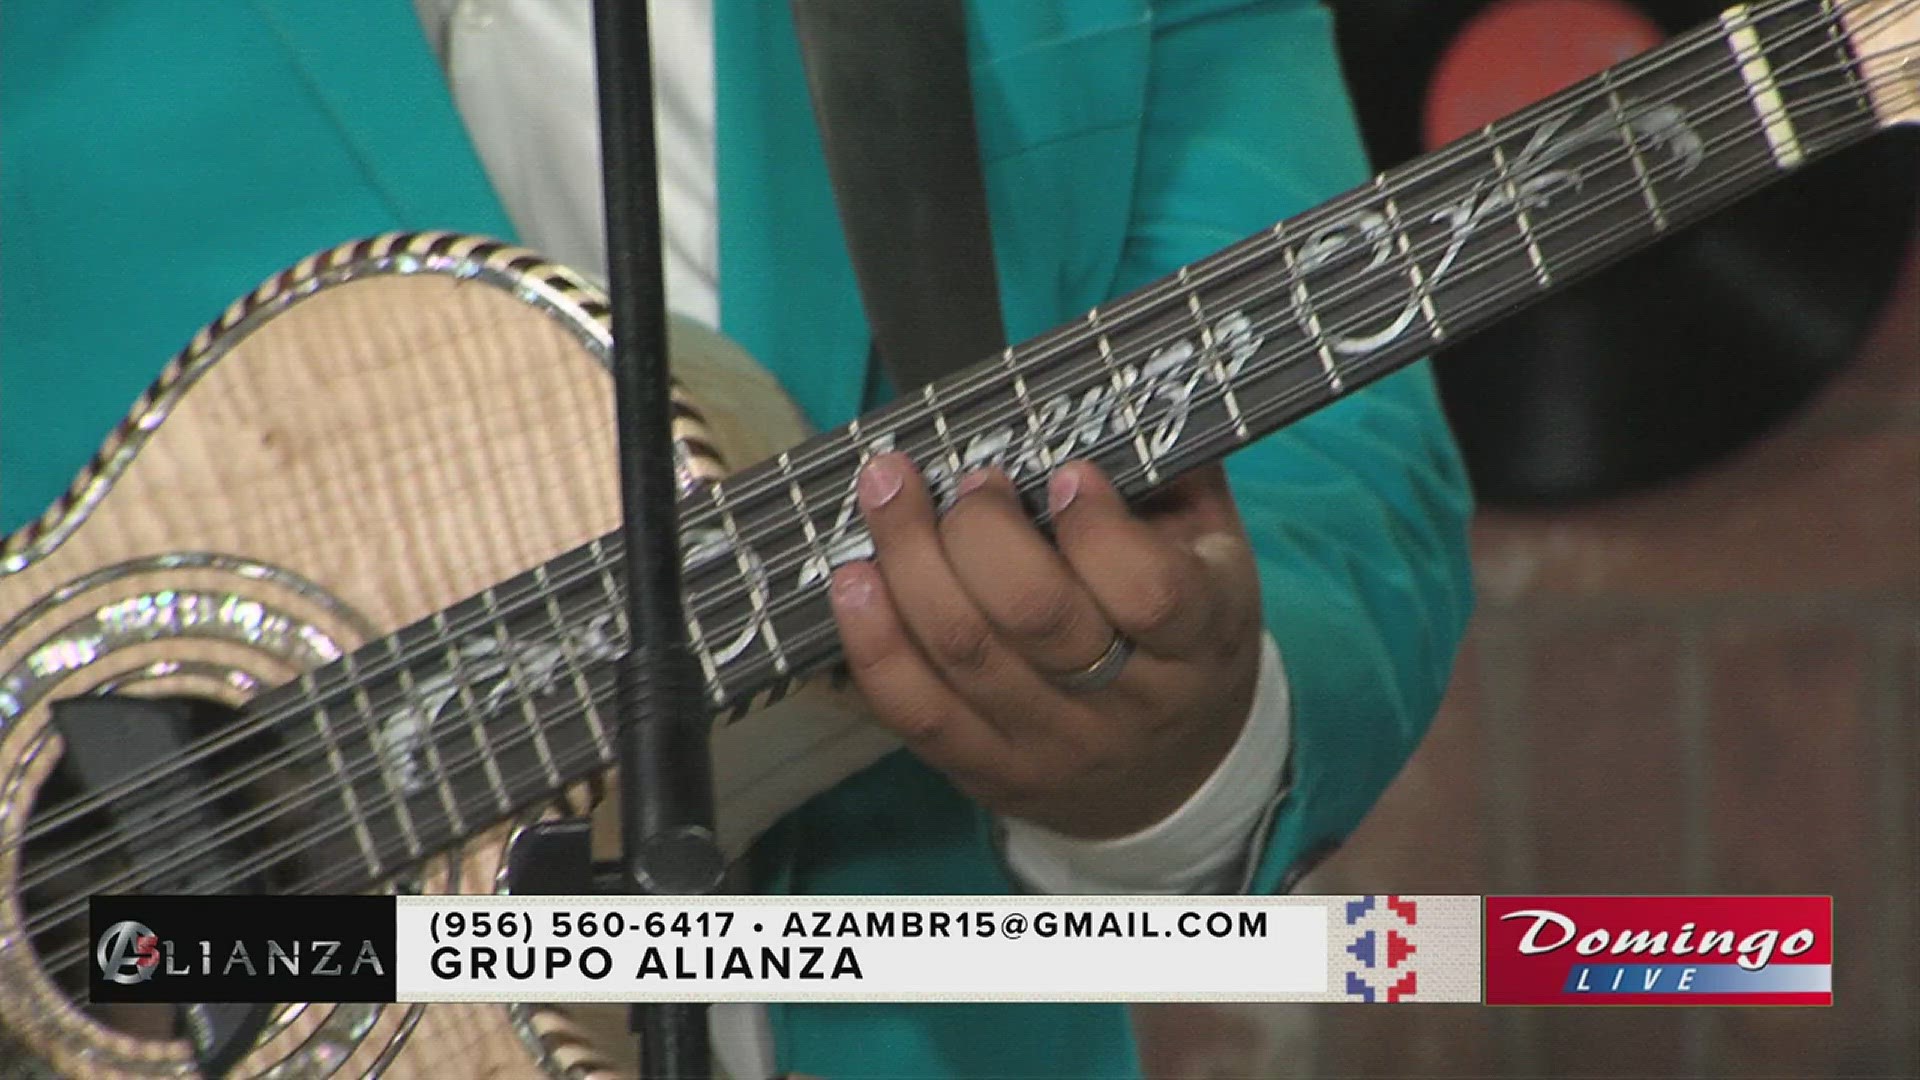 Grupo Alianza played their new song "No Soy Perfecto" for us on Domingo Live.